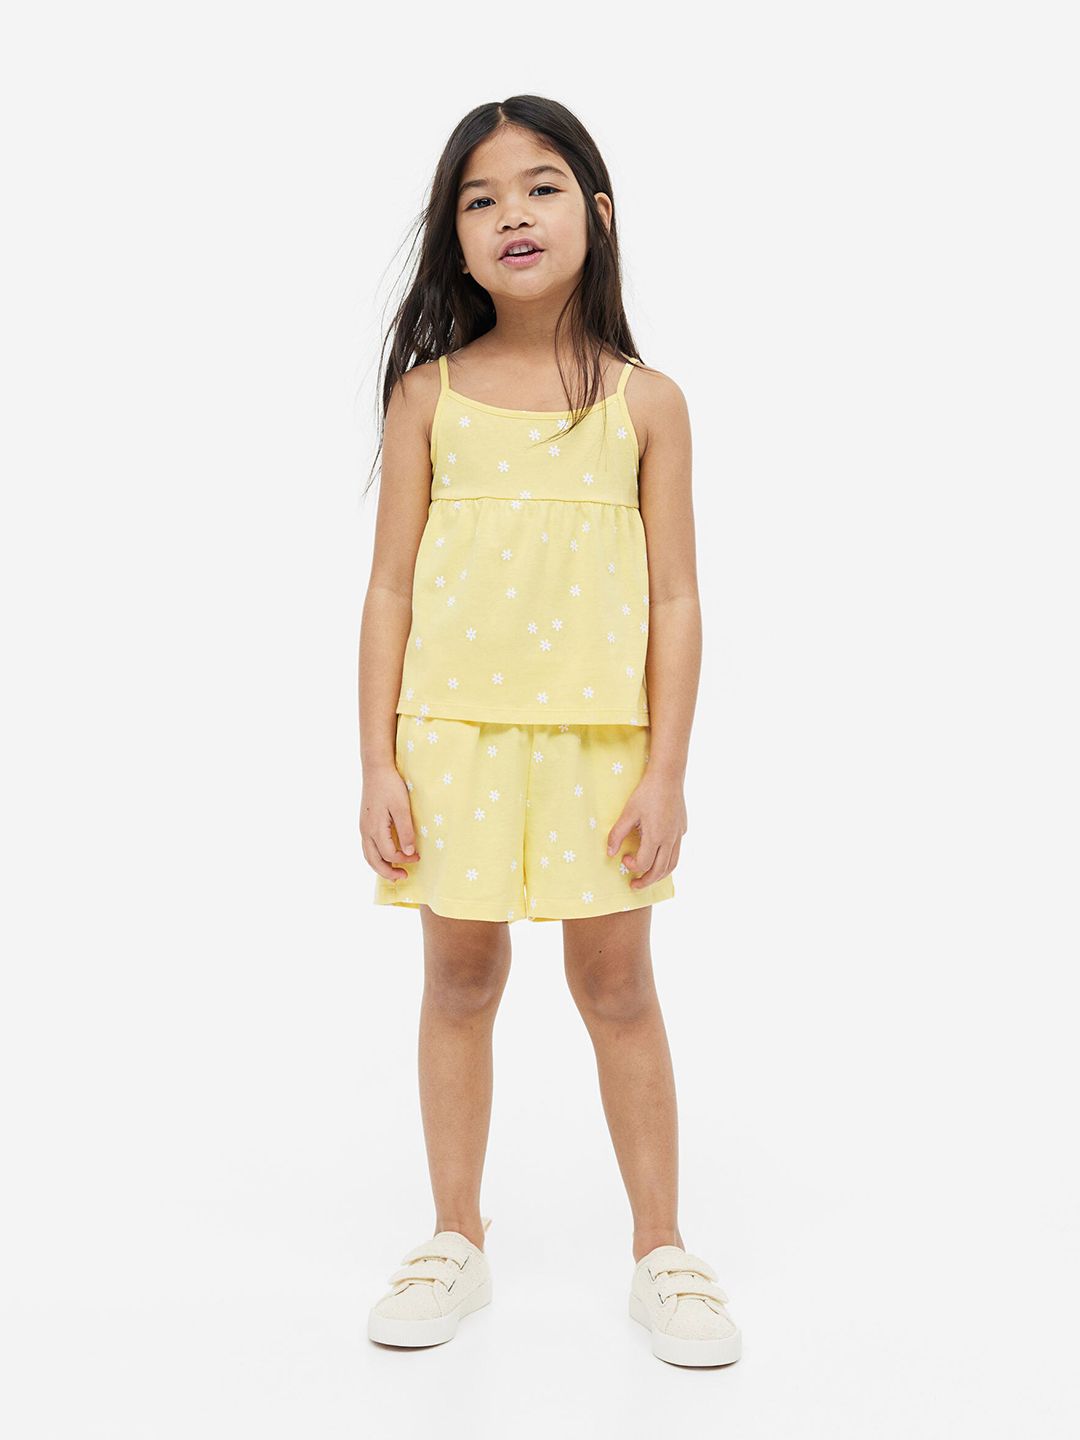 H&M Girls Pure Cotton Strappy Top Price in India